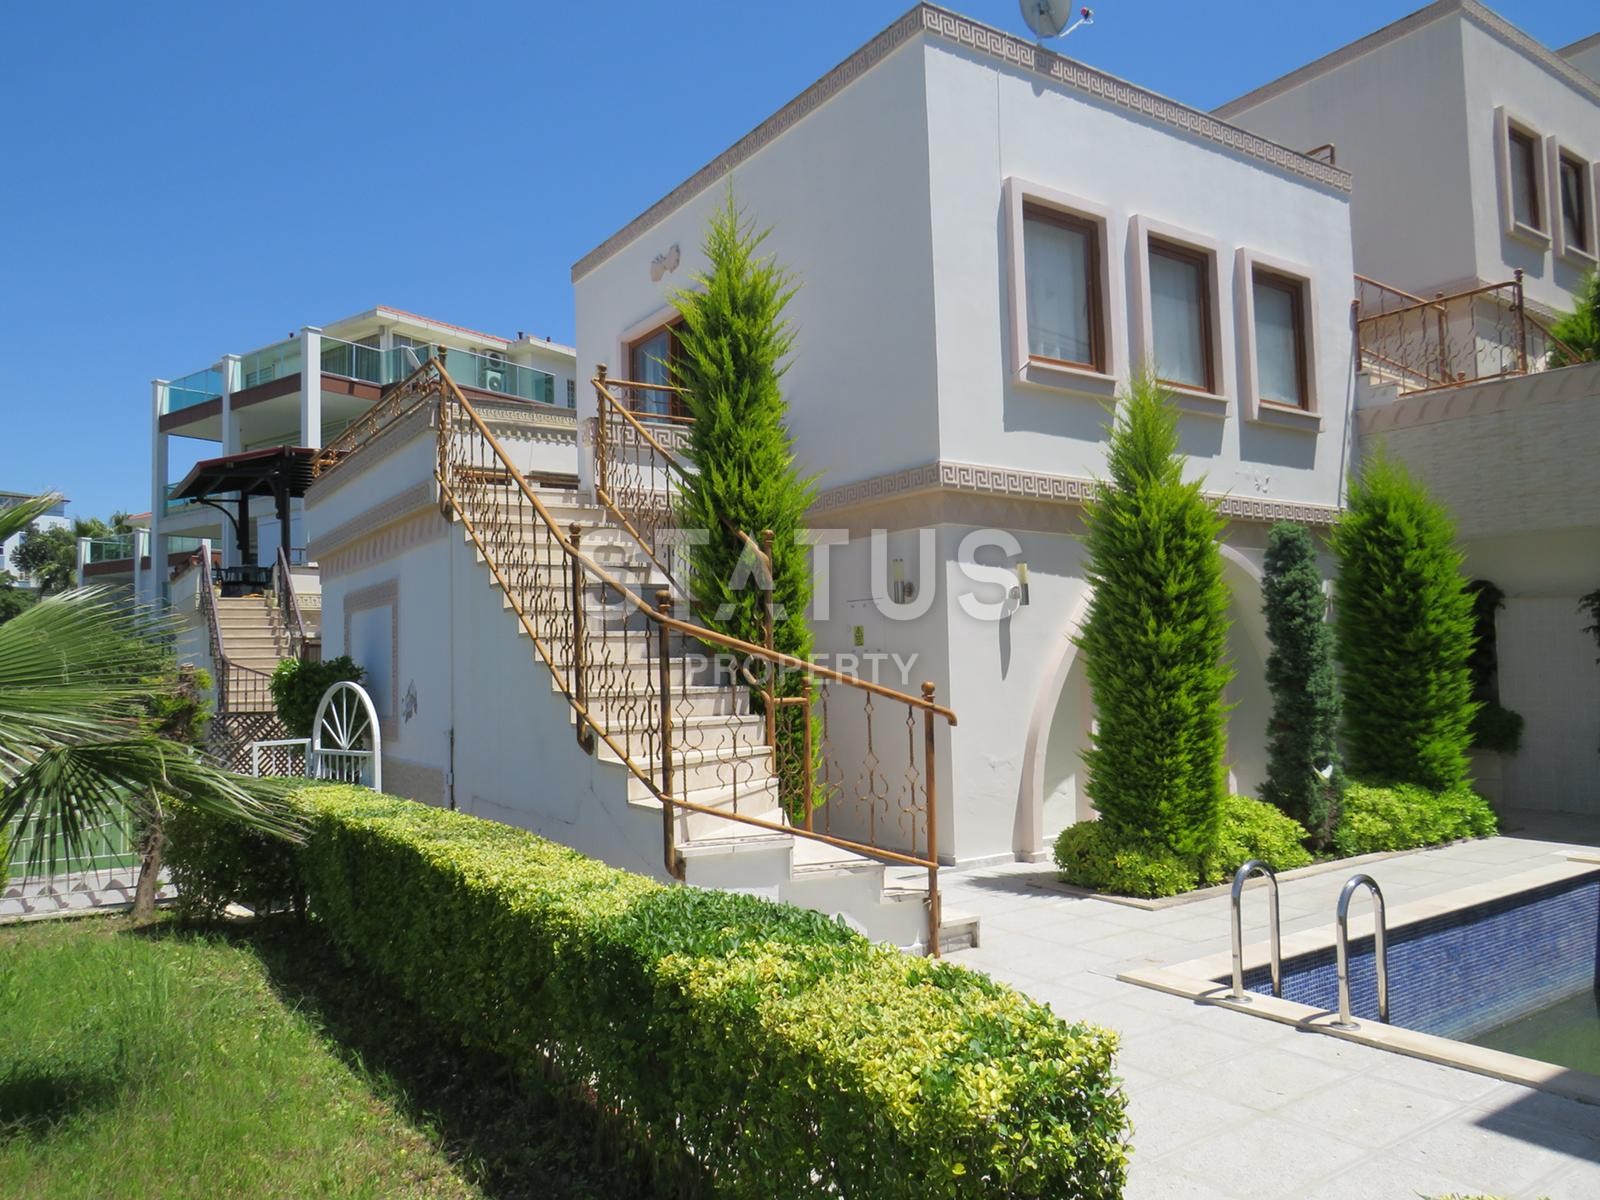 Villa 2+1 renovated and furnished in Kargicak, 120 m2 фото 1